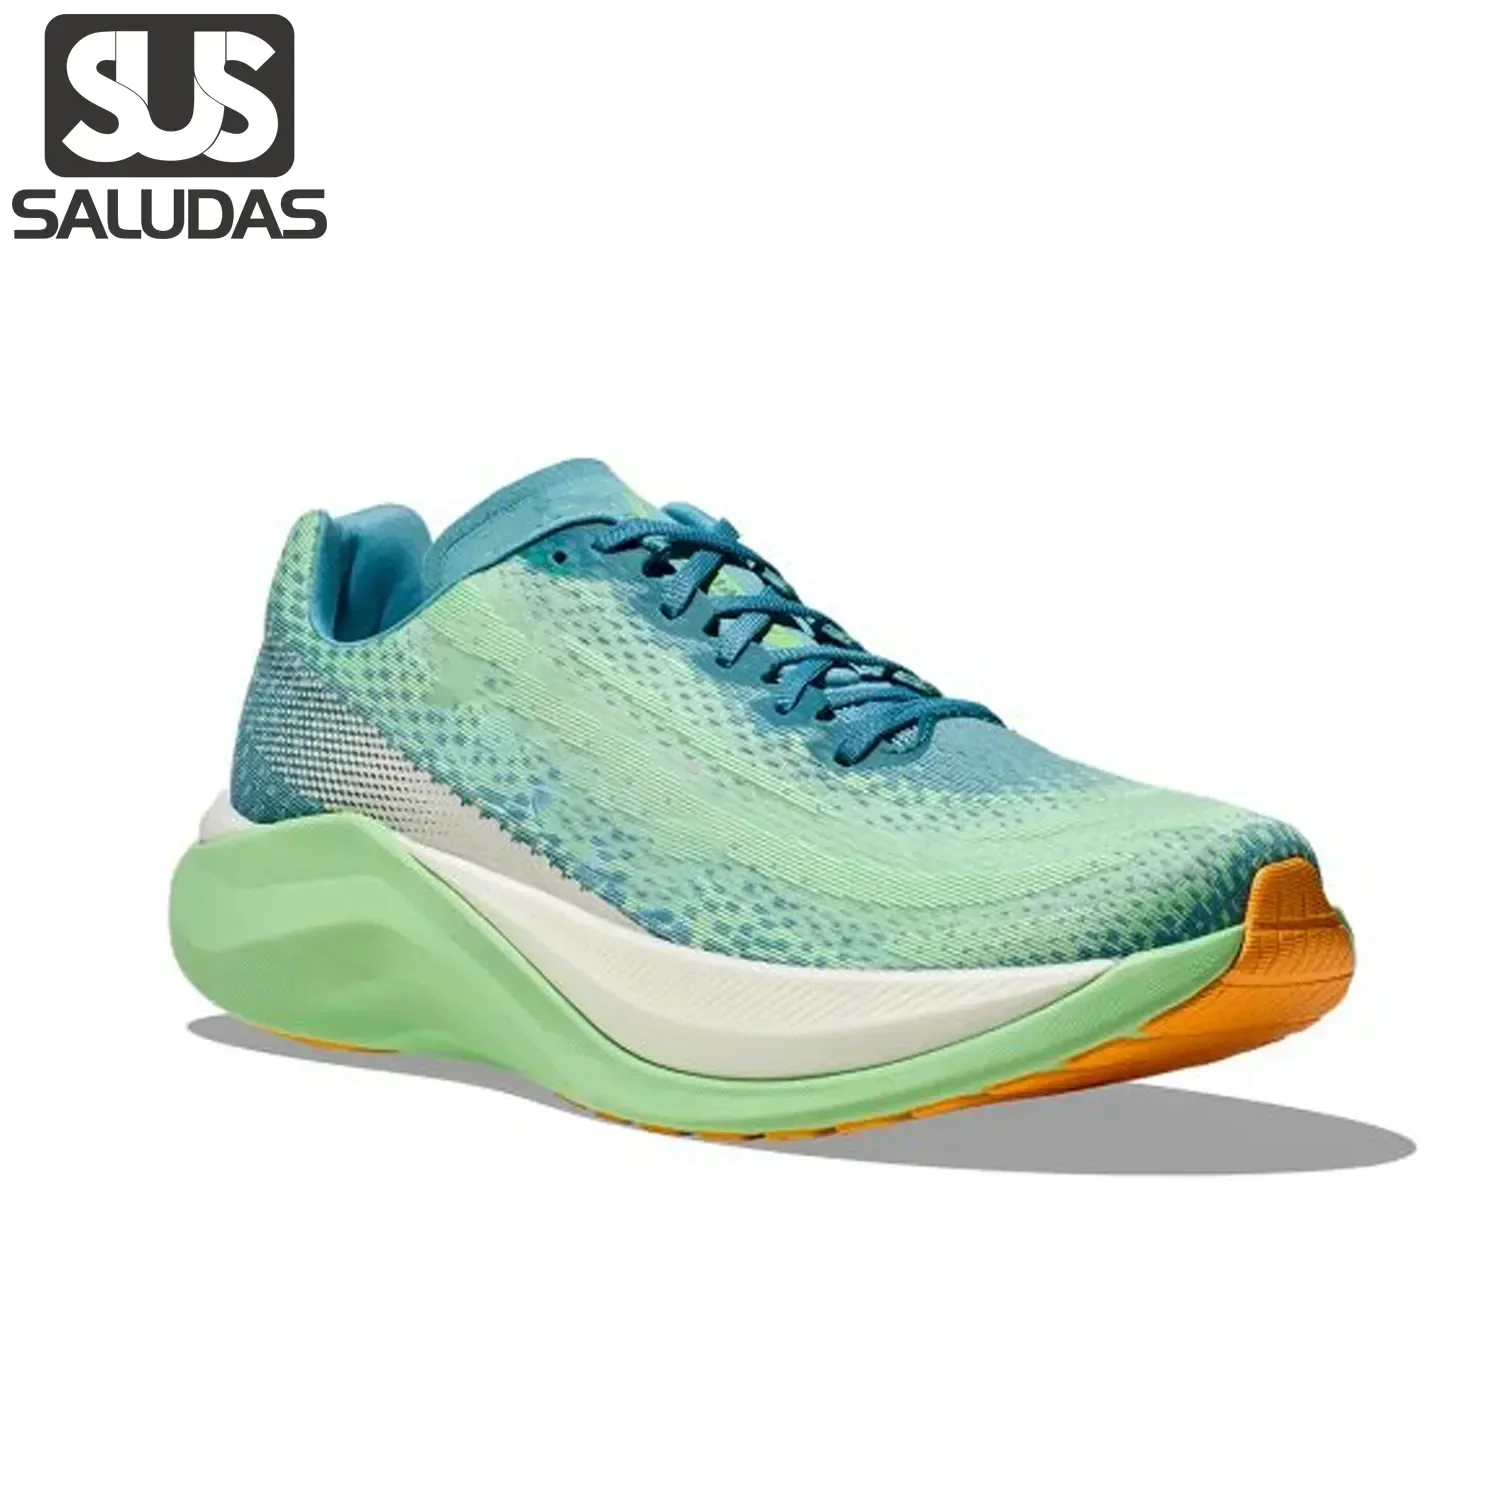 

SALUDAS Mach X Road Running Shoes Men and Women Speed Rebound Cushioning Breathable Training Shoe Outdoor Unisex Casual Sneakers